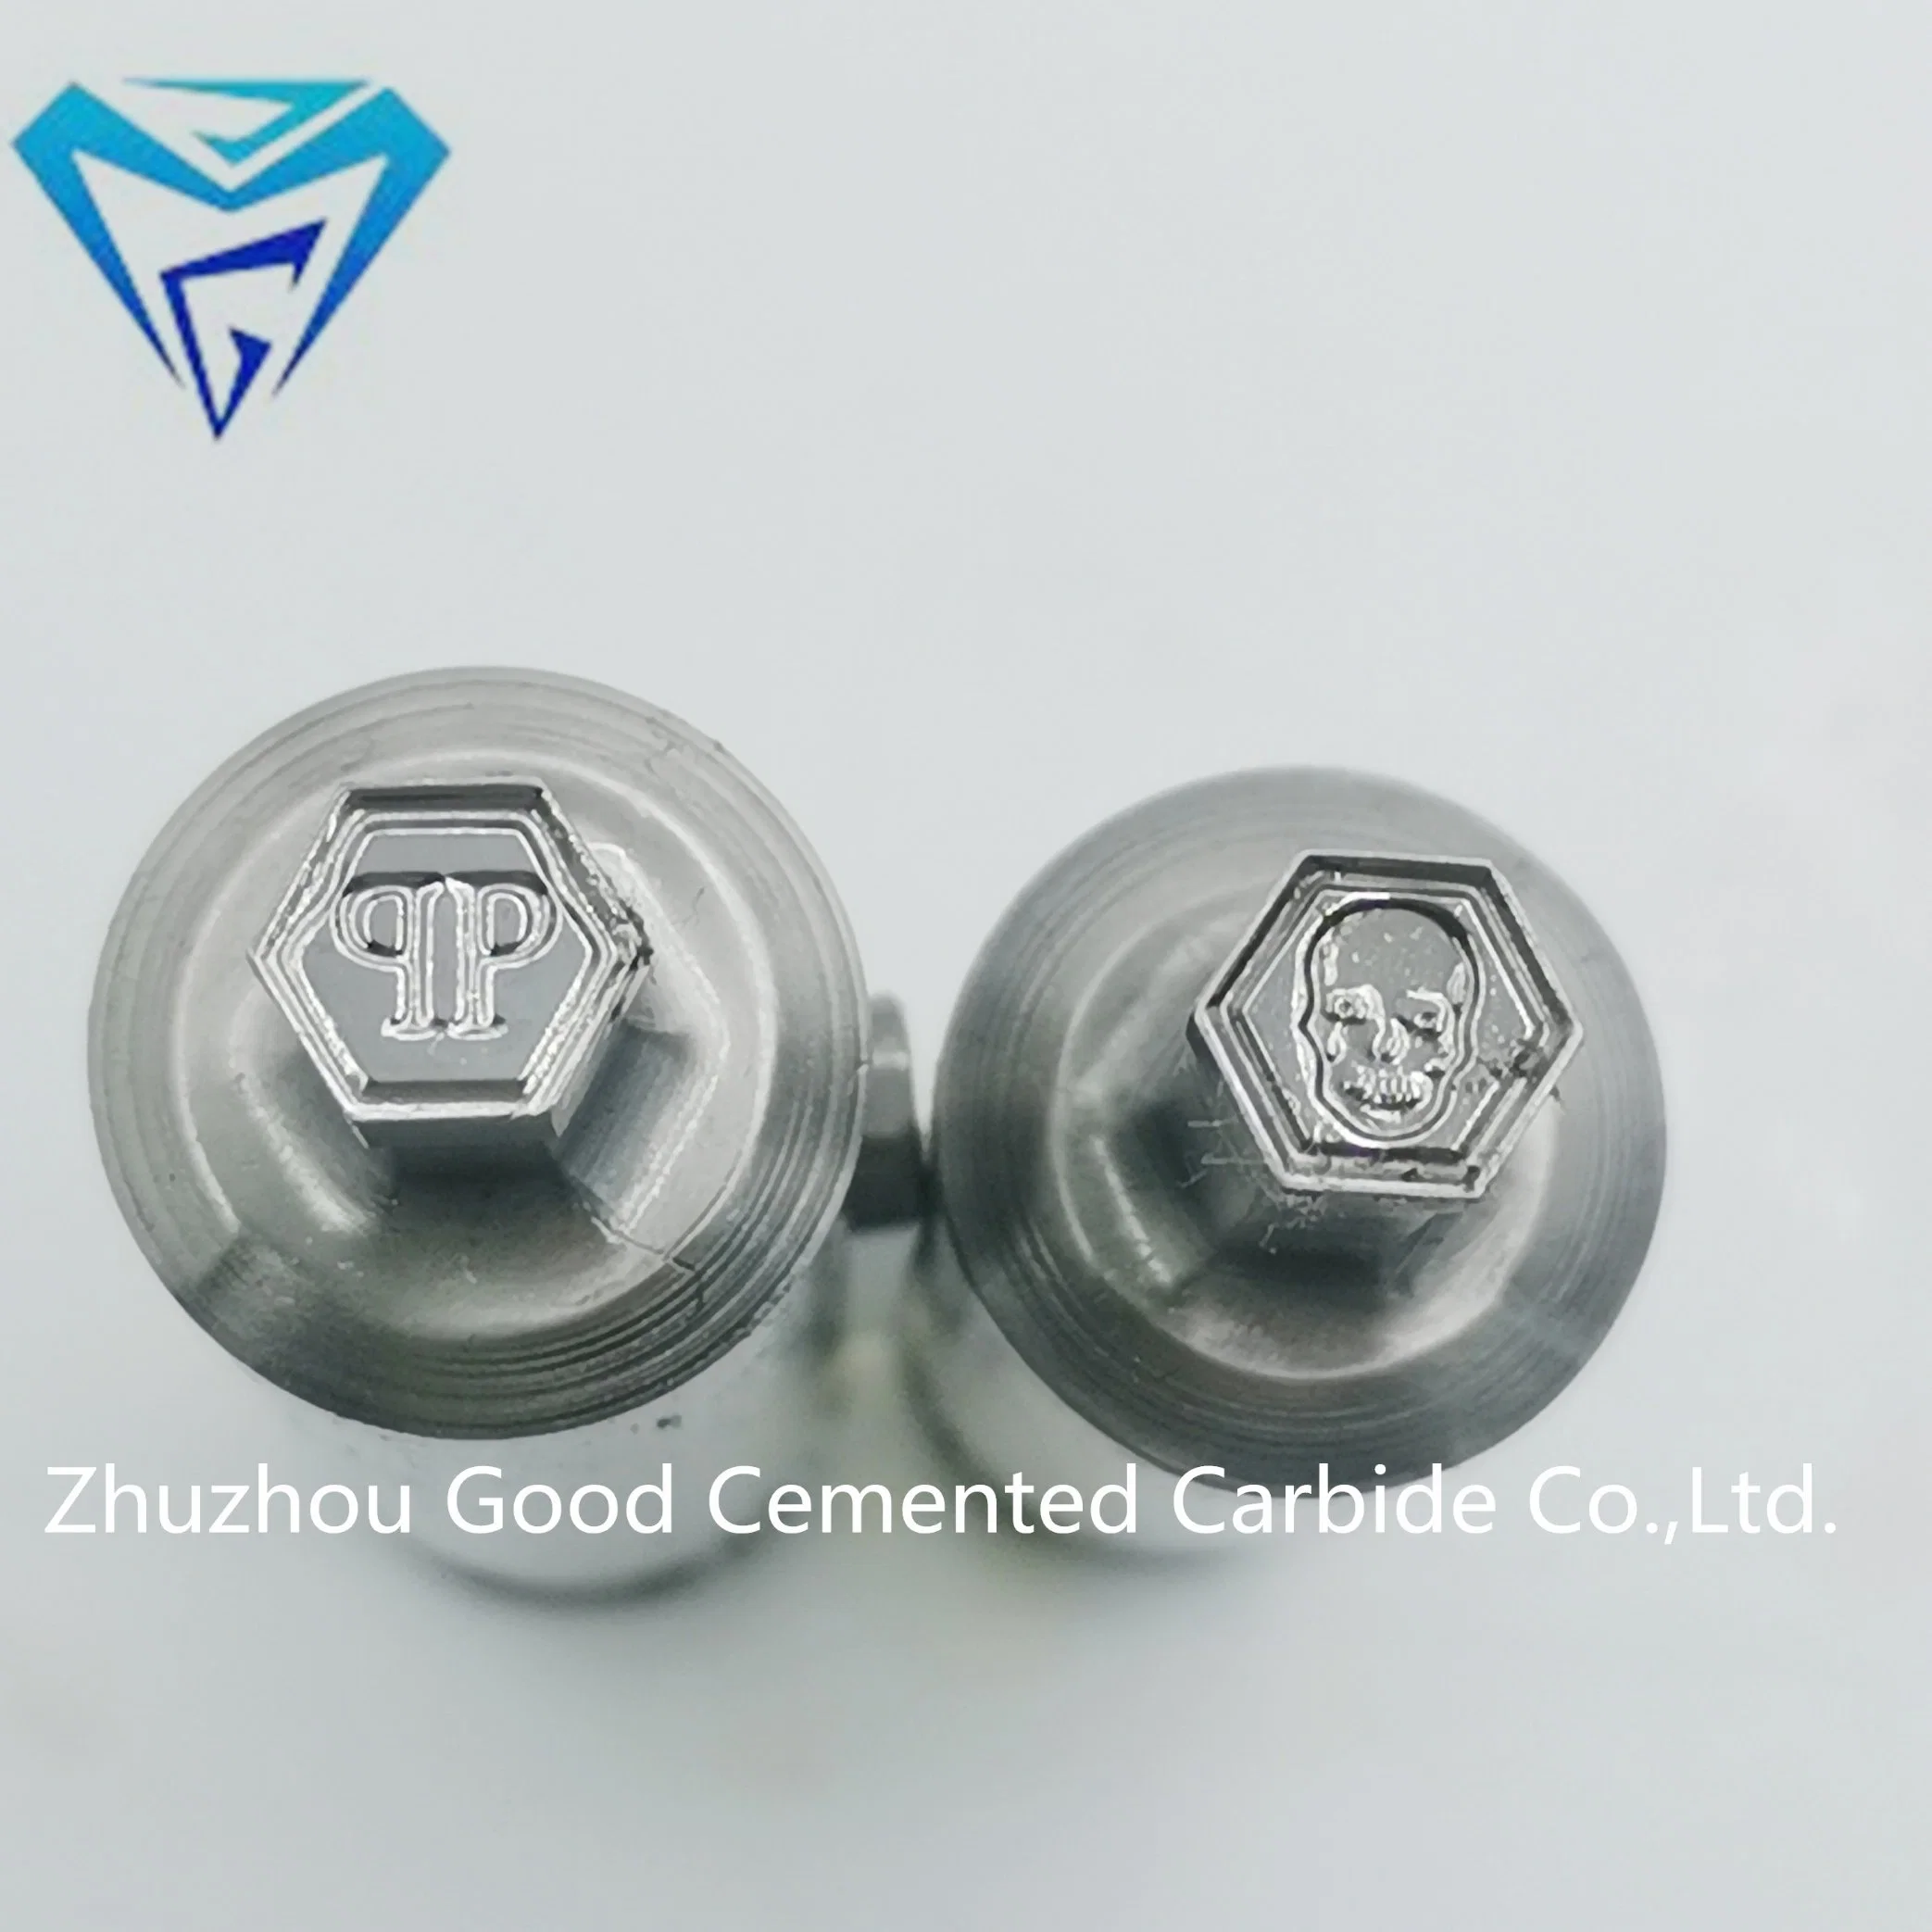 Custom Irregular Shape Lettering Spu Pattern Press Moulding Dies Candy Making Machine Metal Stamping Mold Candy Punch Die Rotary Press Die Zp9/ Zp10/ Zp12, Pill